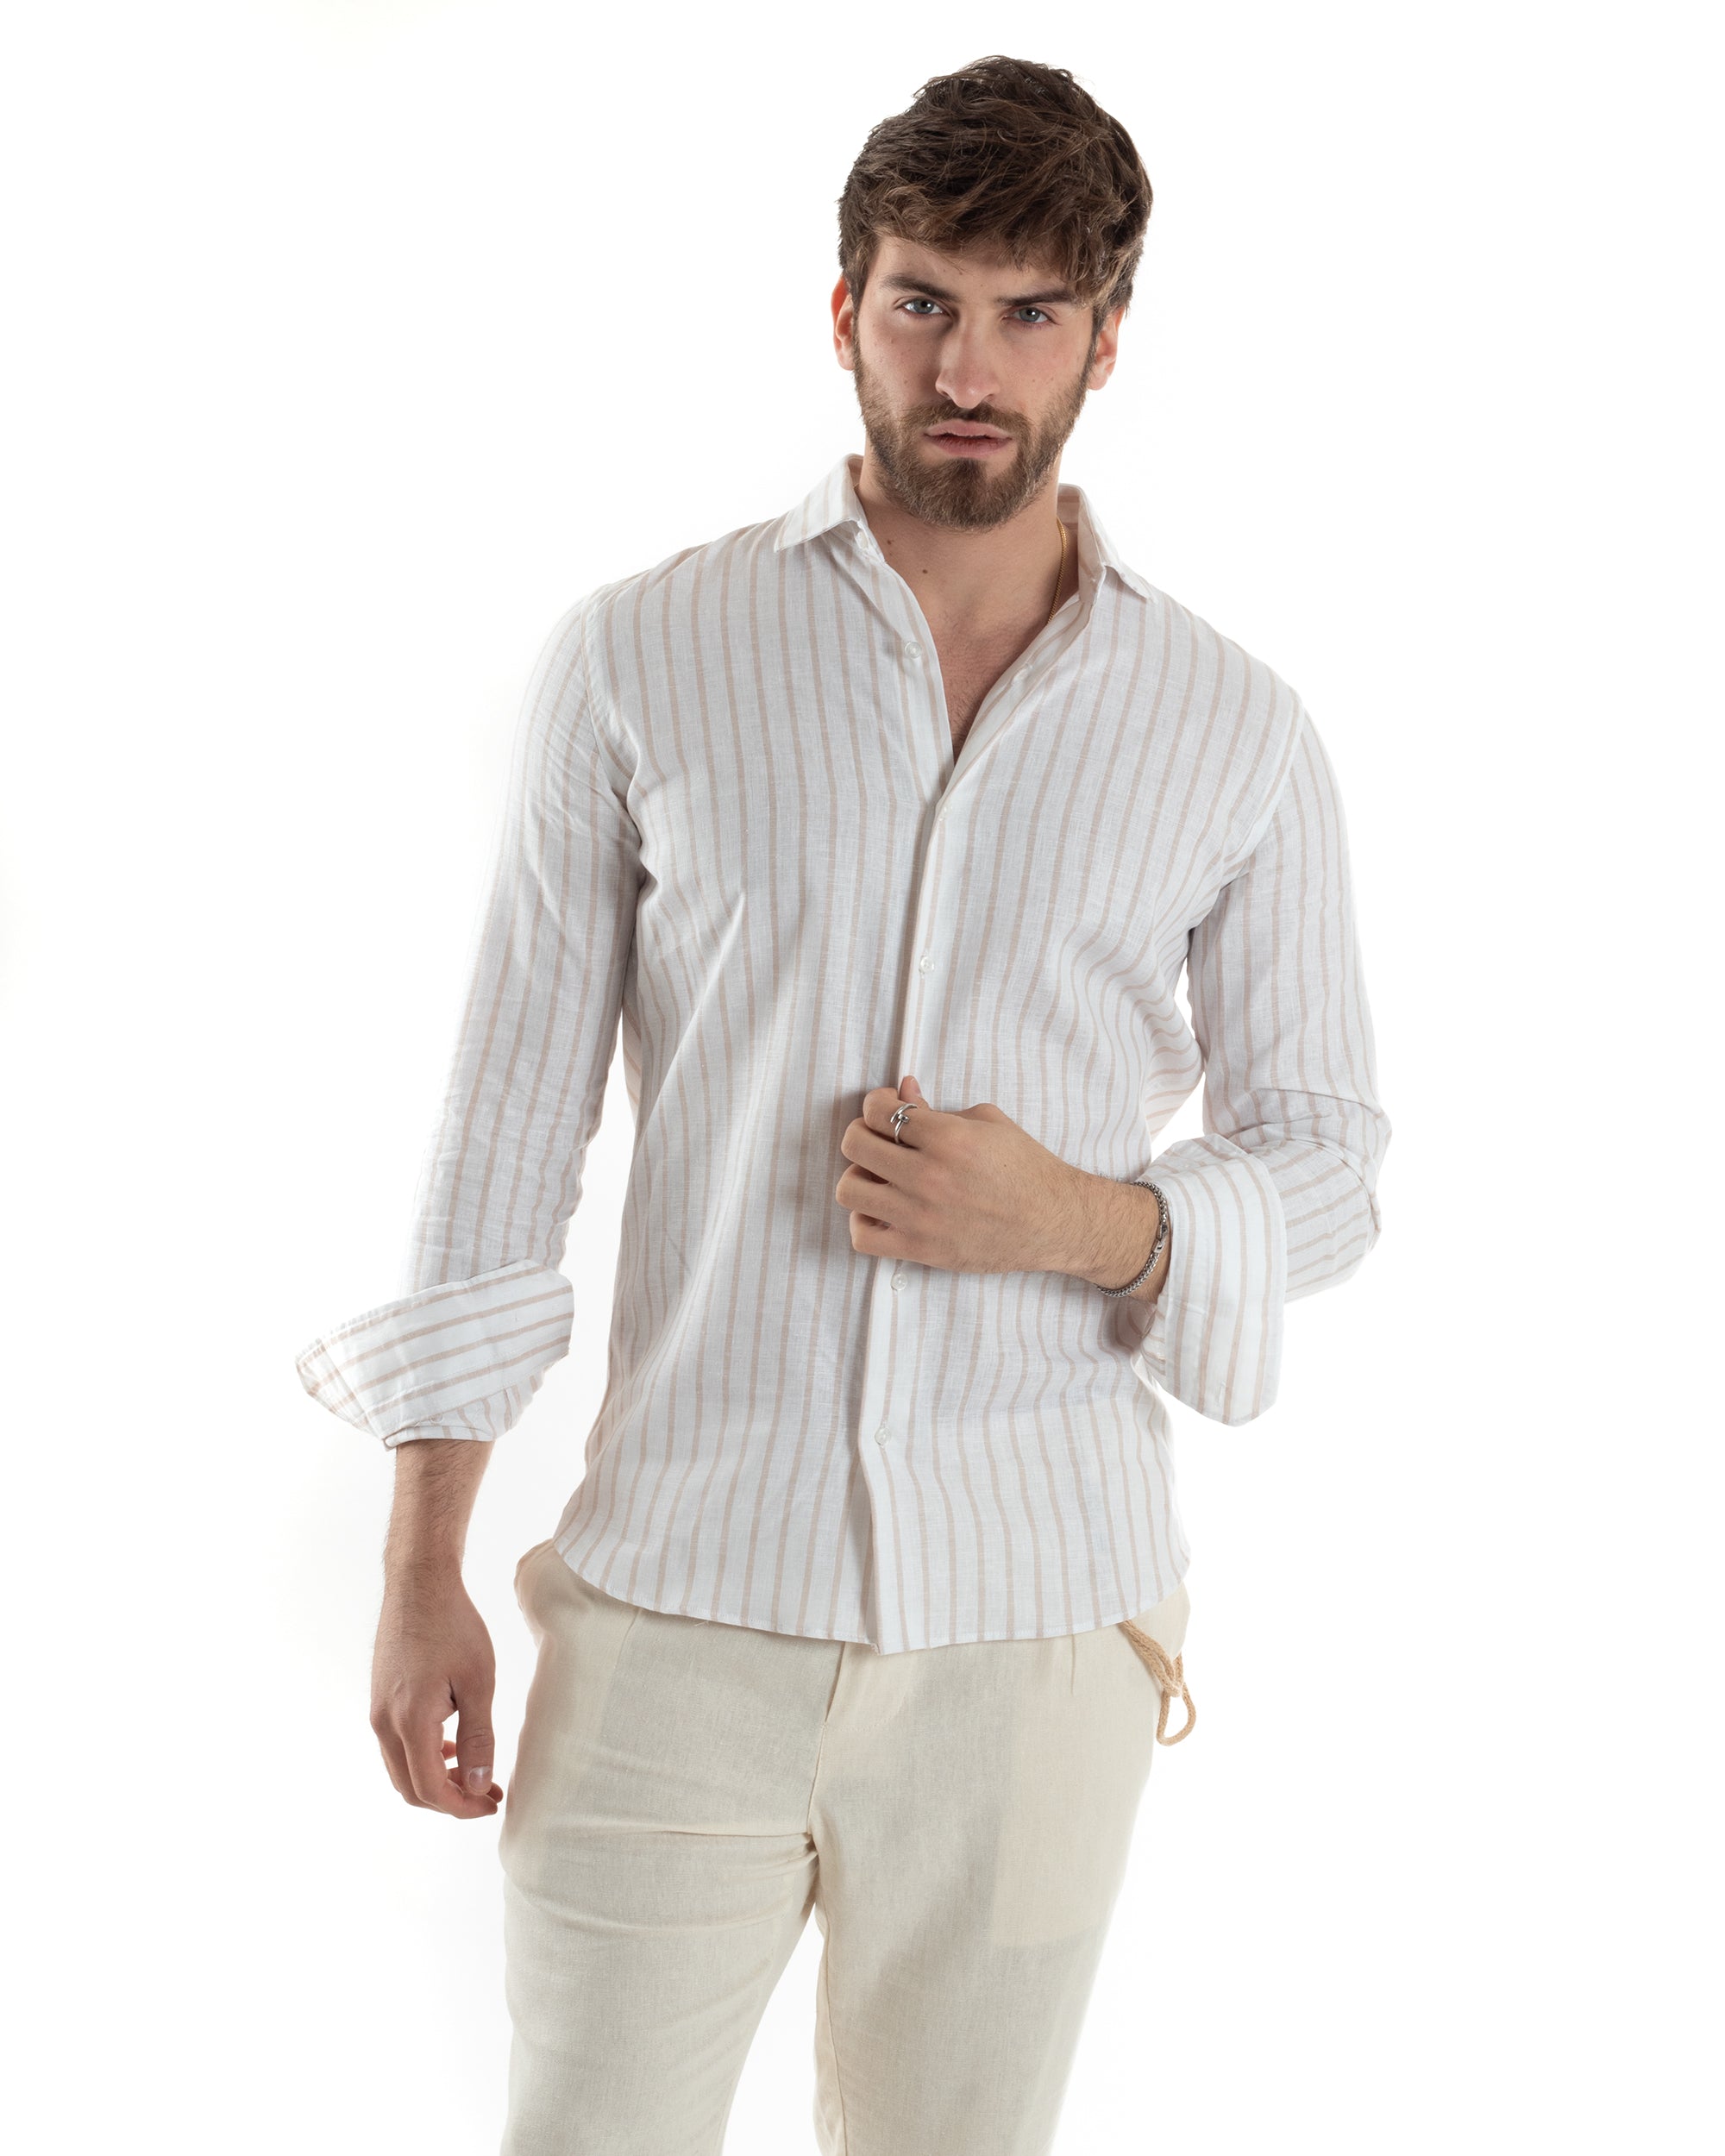 Men's Shirt With French Collar Long Sleeve Linen Narrow Stripe Casual Beige GIOSAL-C2750A